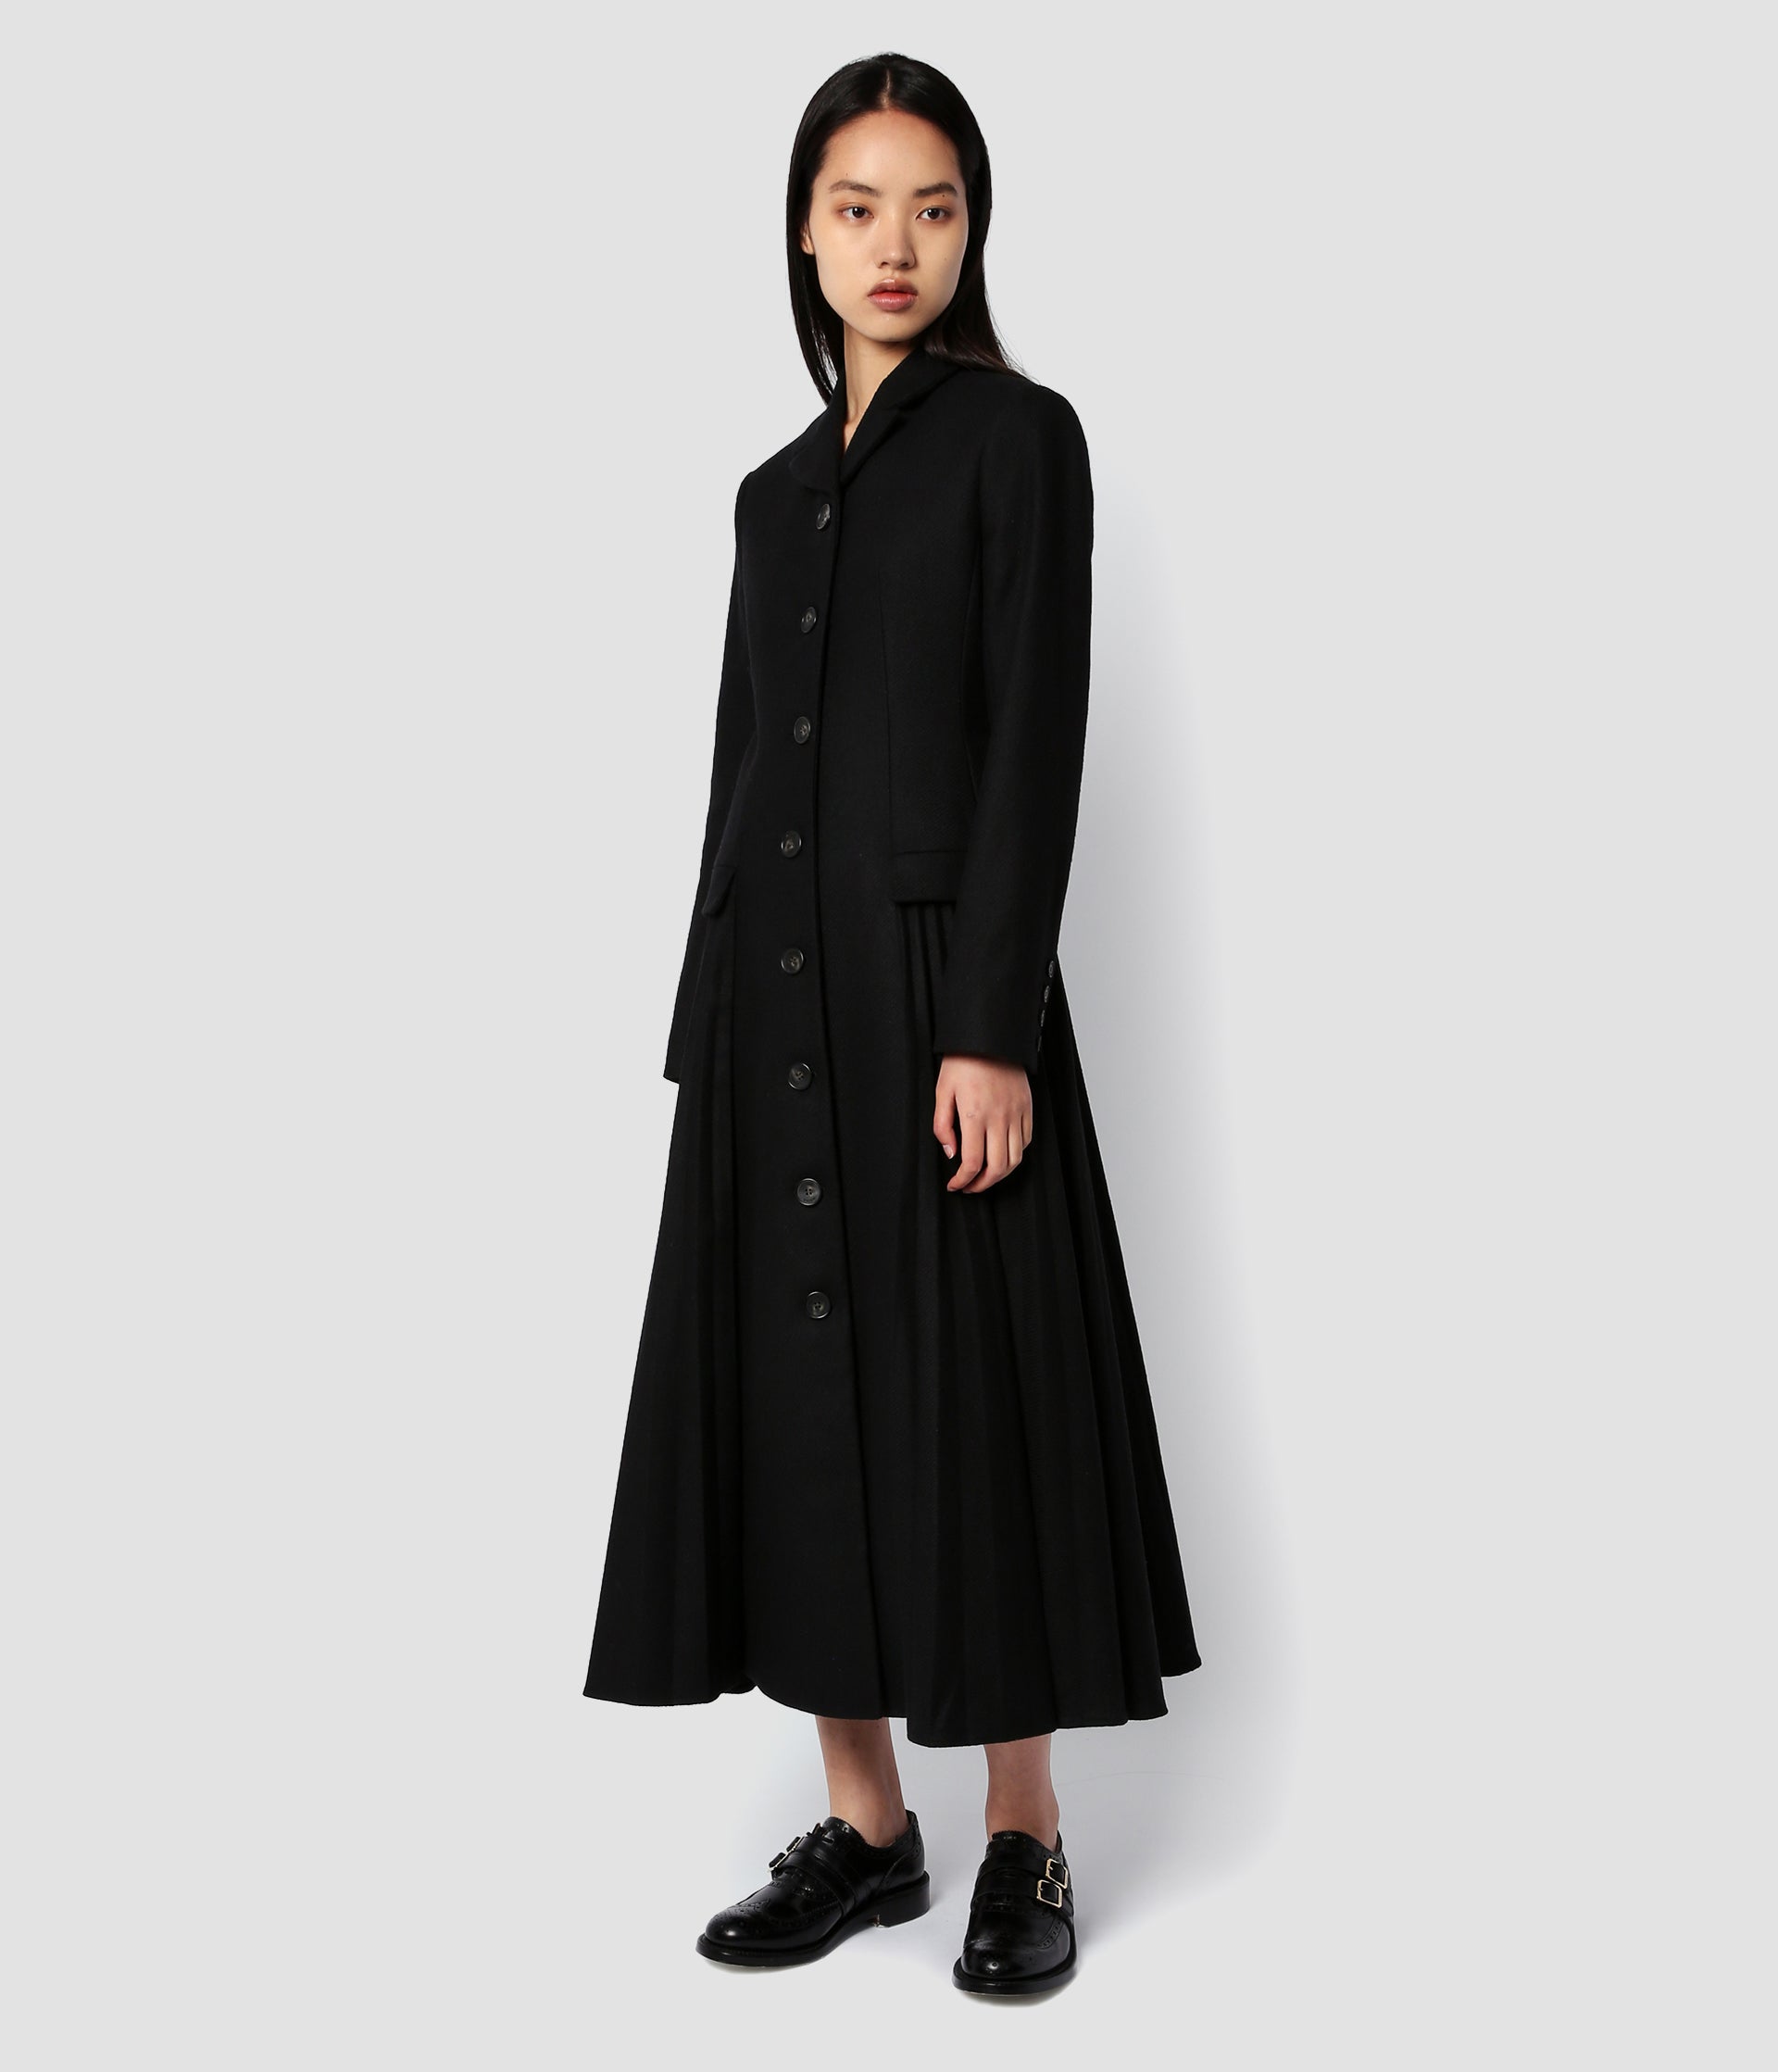 A black single breasted coat by designer Erdem with pleating detail at each side extending from the flap pockets. With a rounded lapel collar an midi length, the coat has all the classic details of a single breasted coat. 